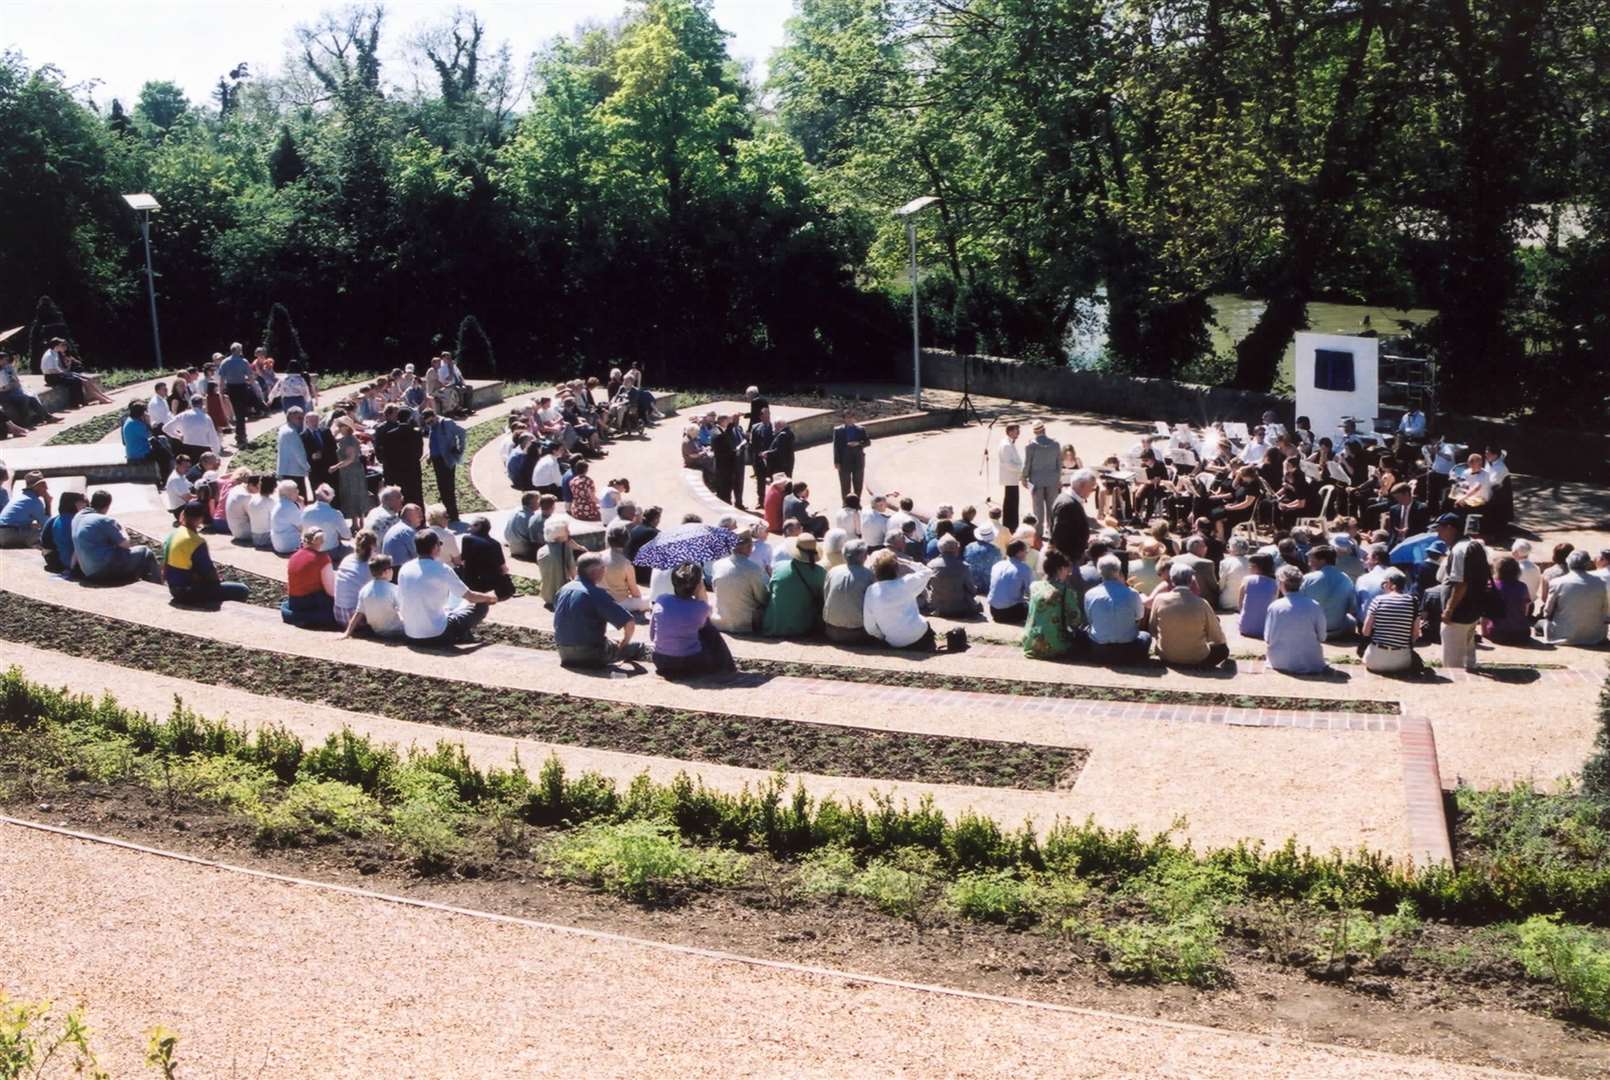 Some use has been made of the Maidstone Amphitheatre